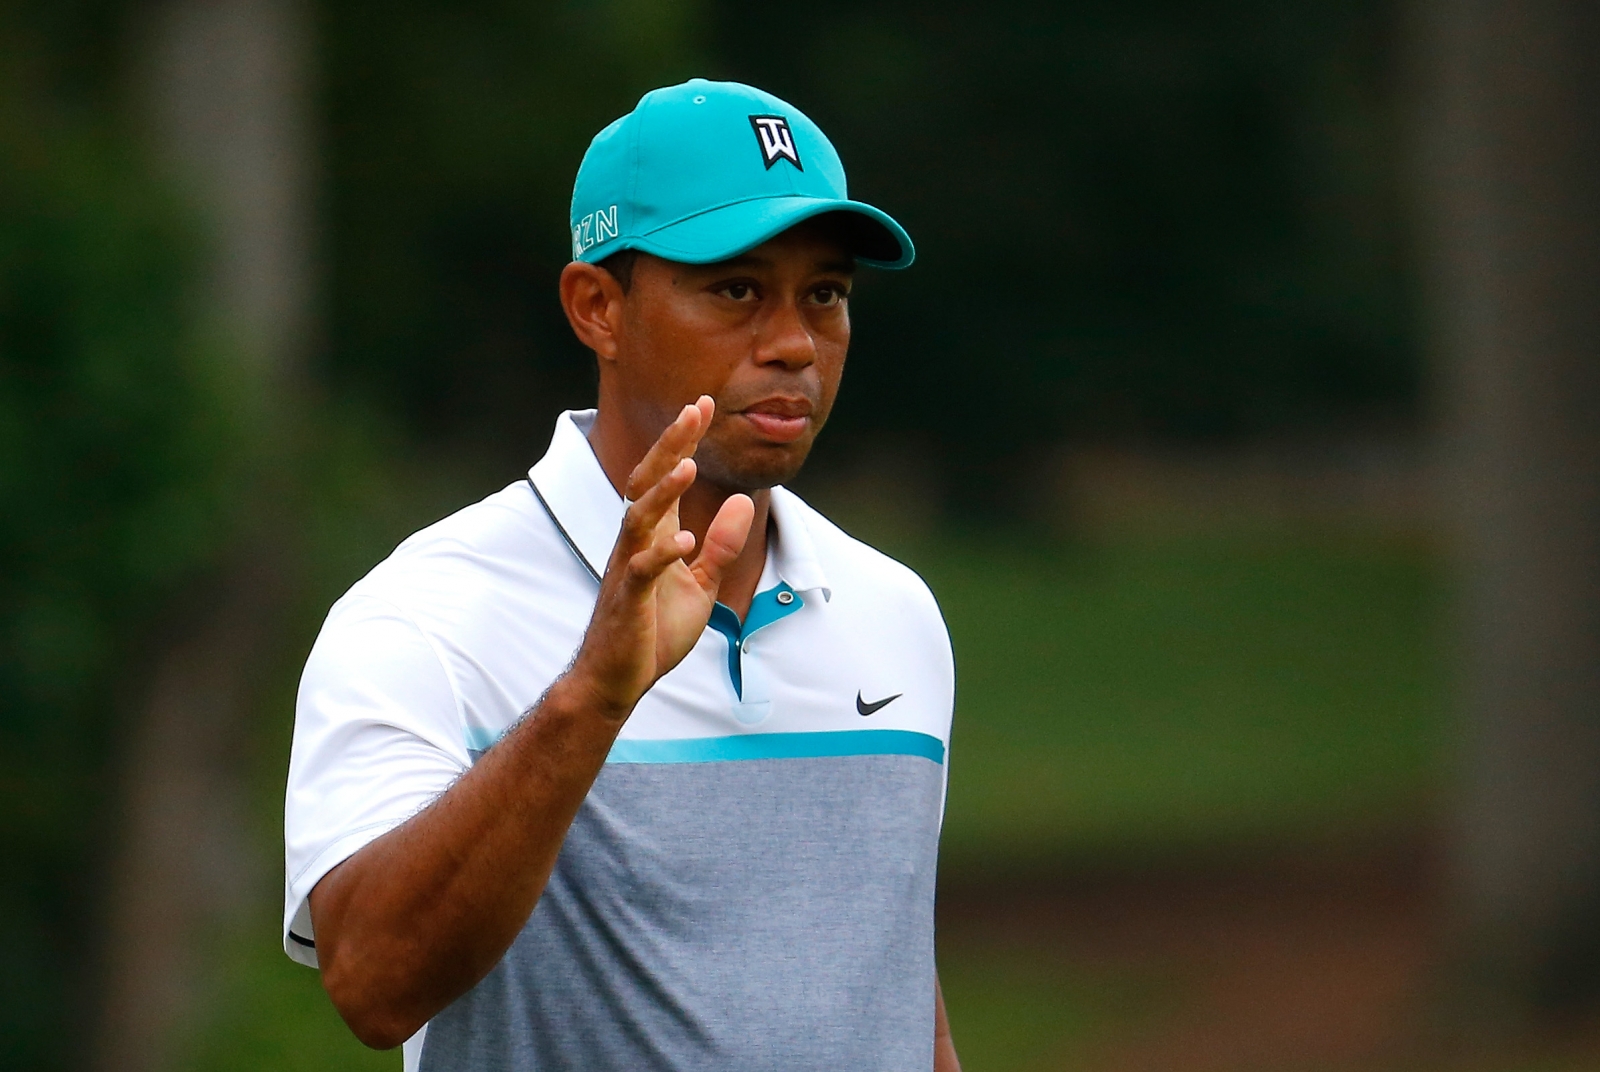 Golf: Tiger Woods back on top form with best round in two years at Wyndham Championship